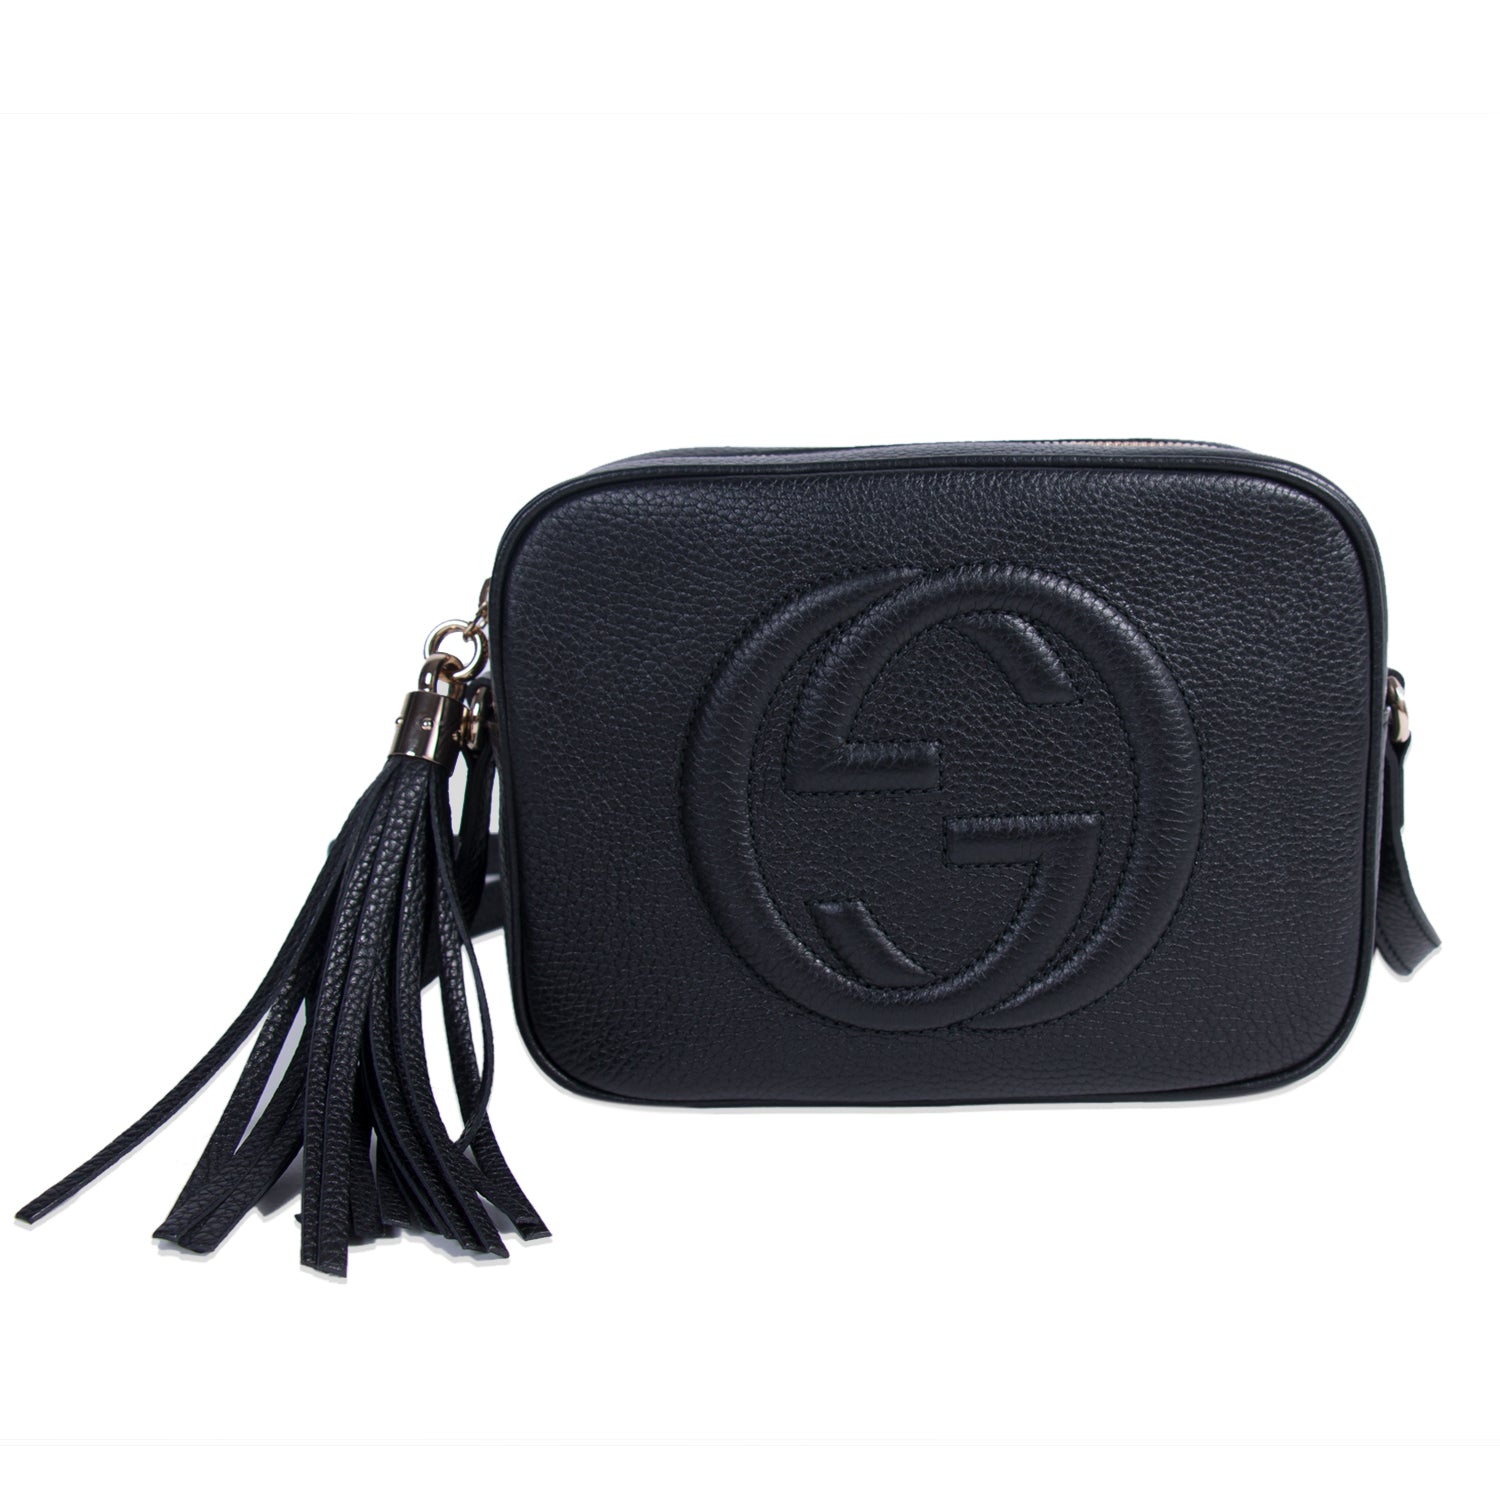 Shop authentic Gucci Soho Small Leather Disco Bag at revogue for just ...